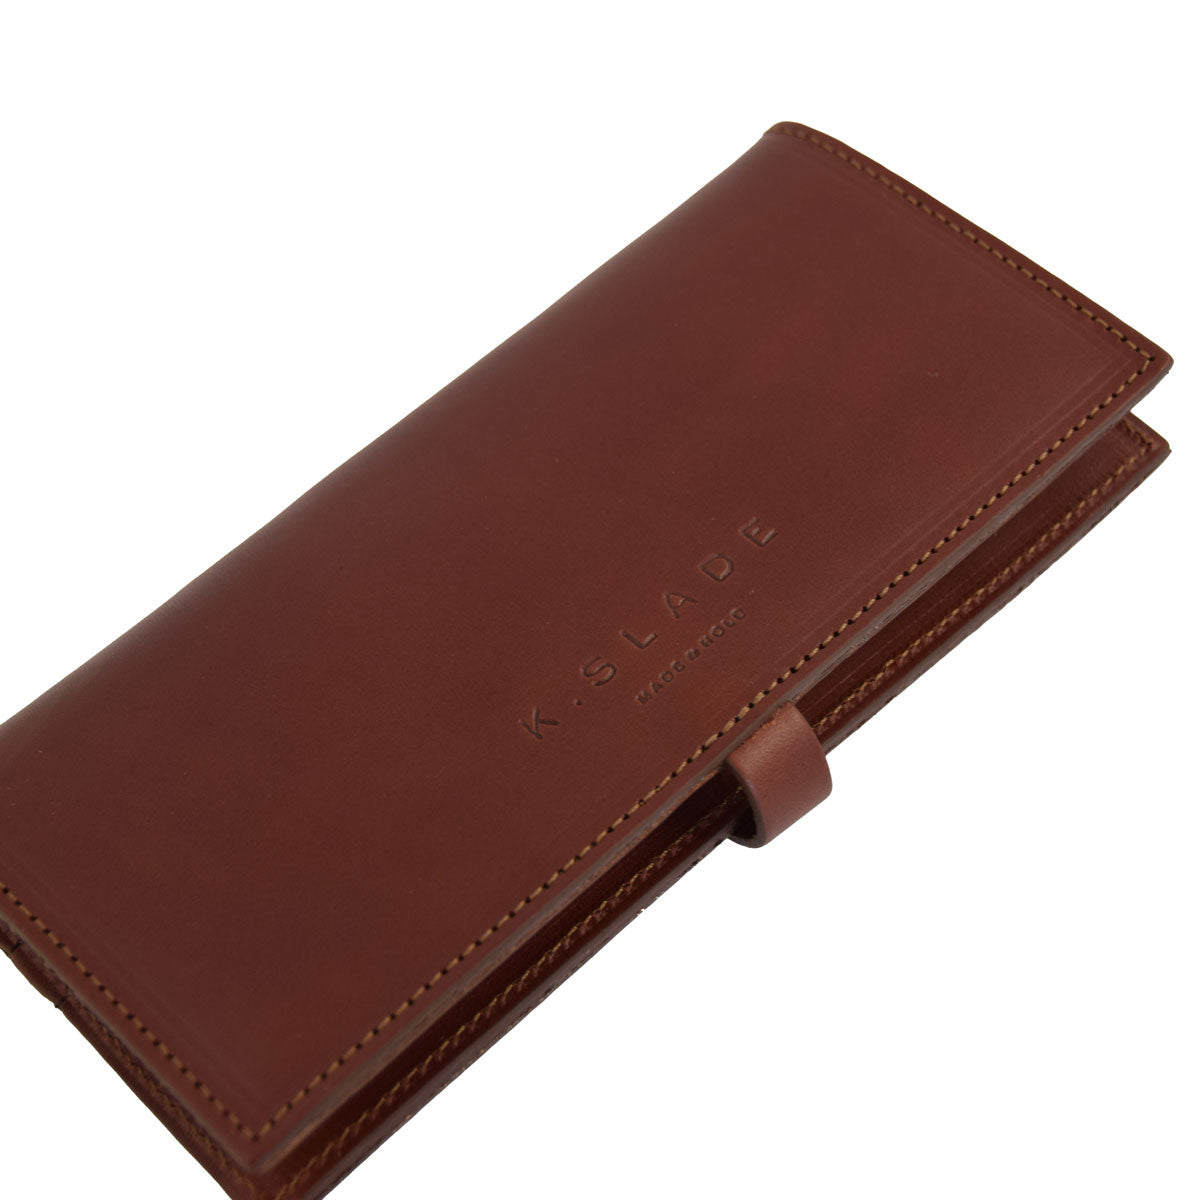 Lincoln Park Wallet | Maple